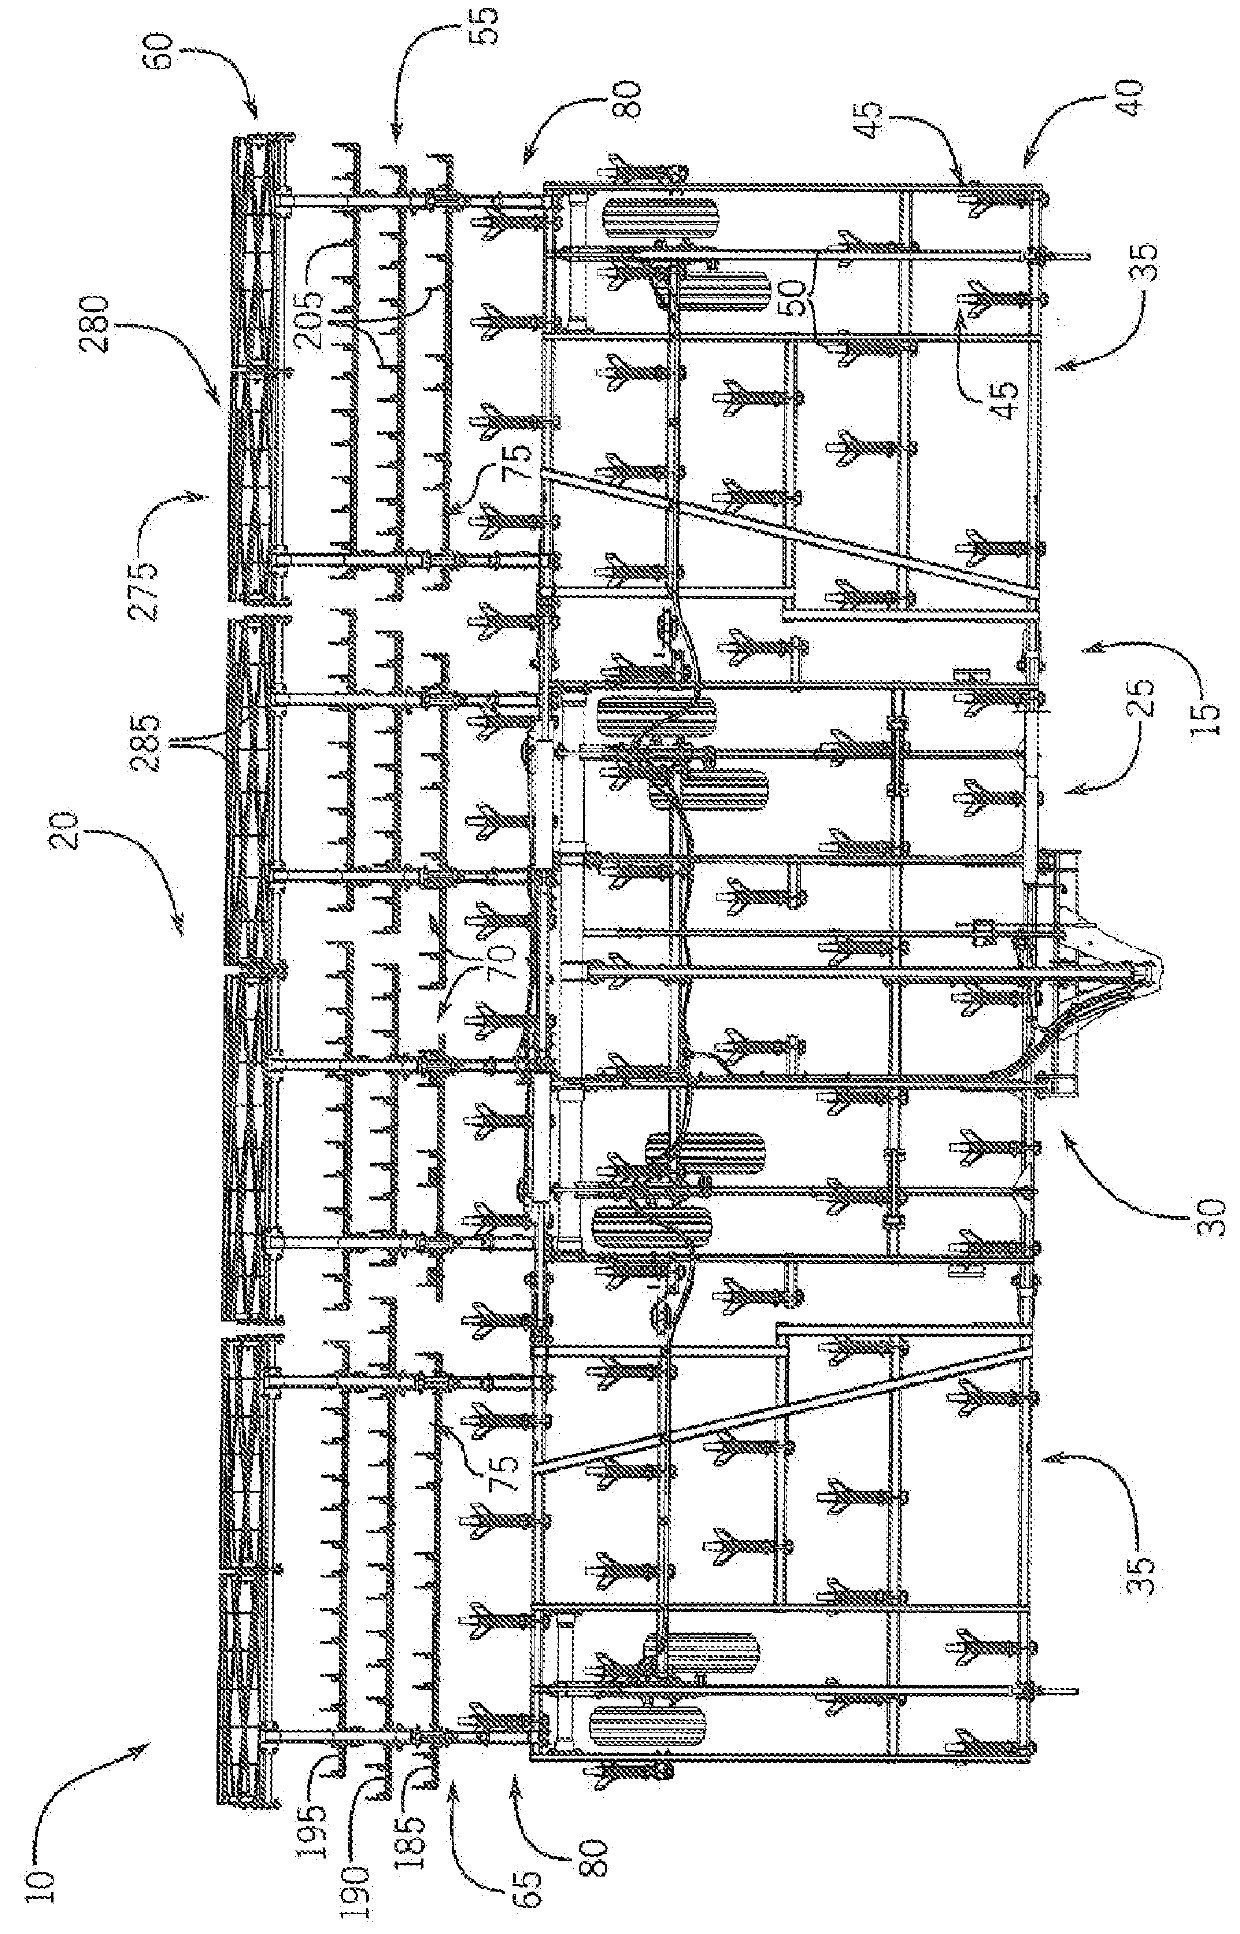 Electronic Control System For Adjusting Smoothing Tools Of A Harrow